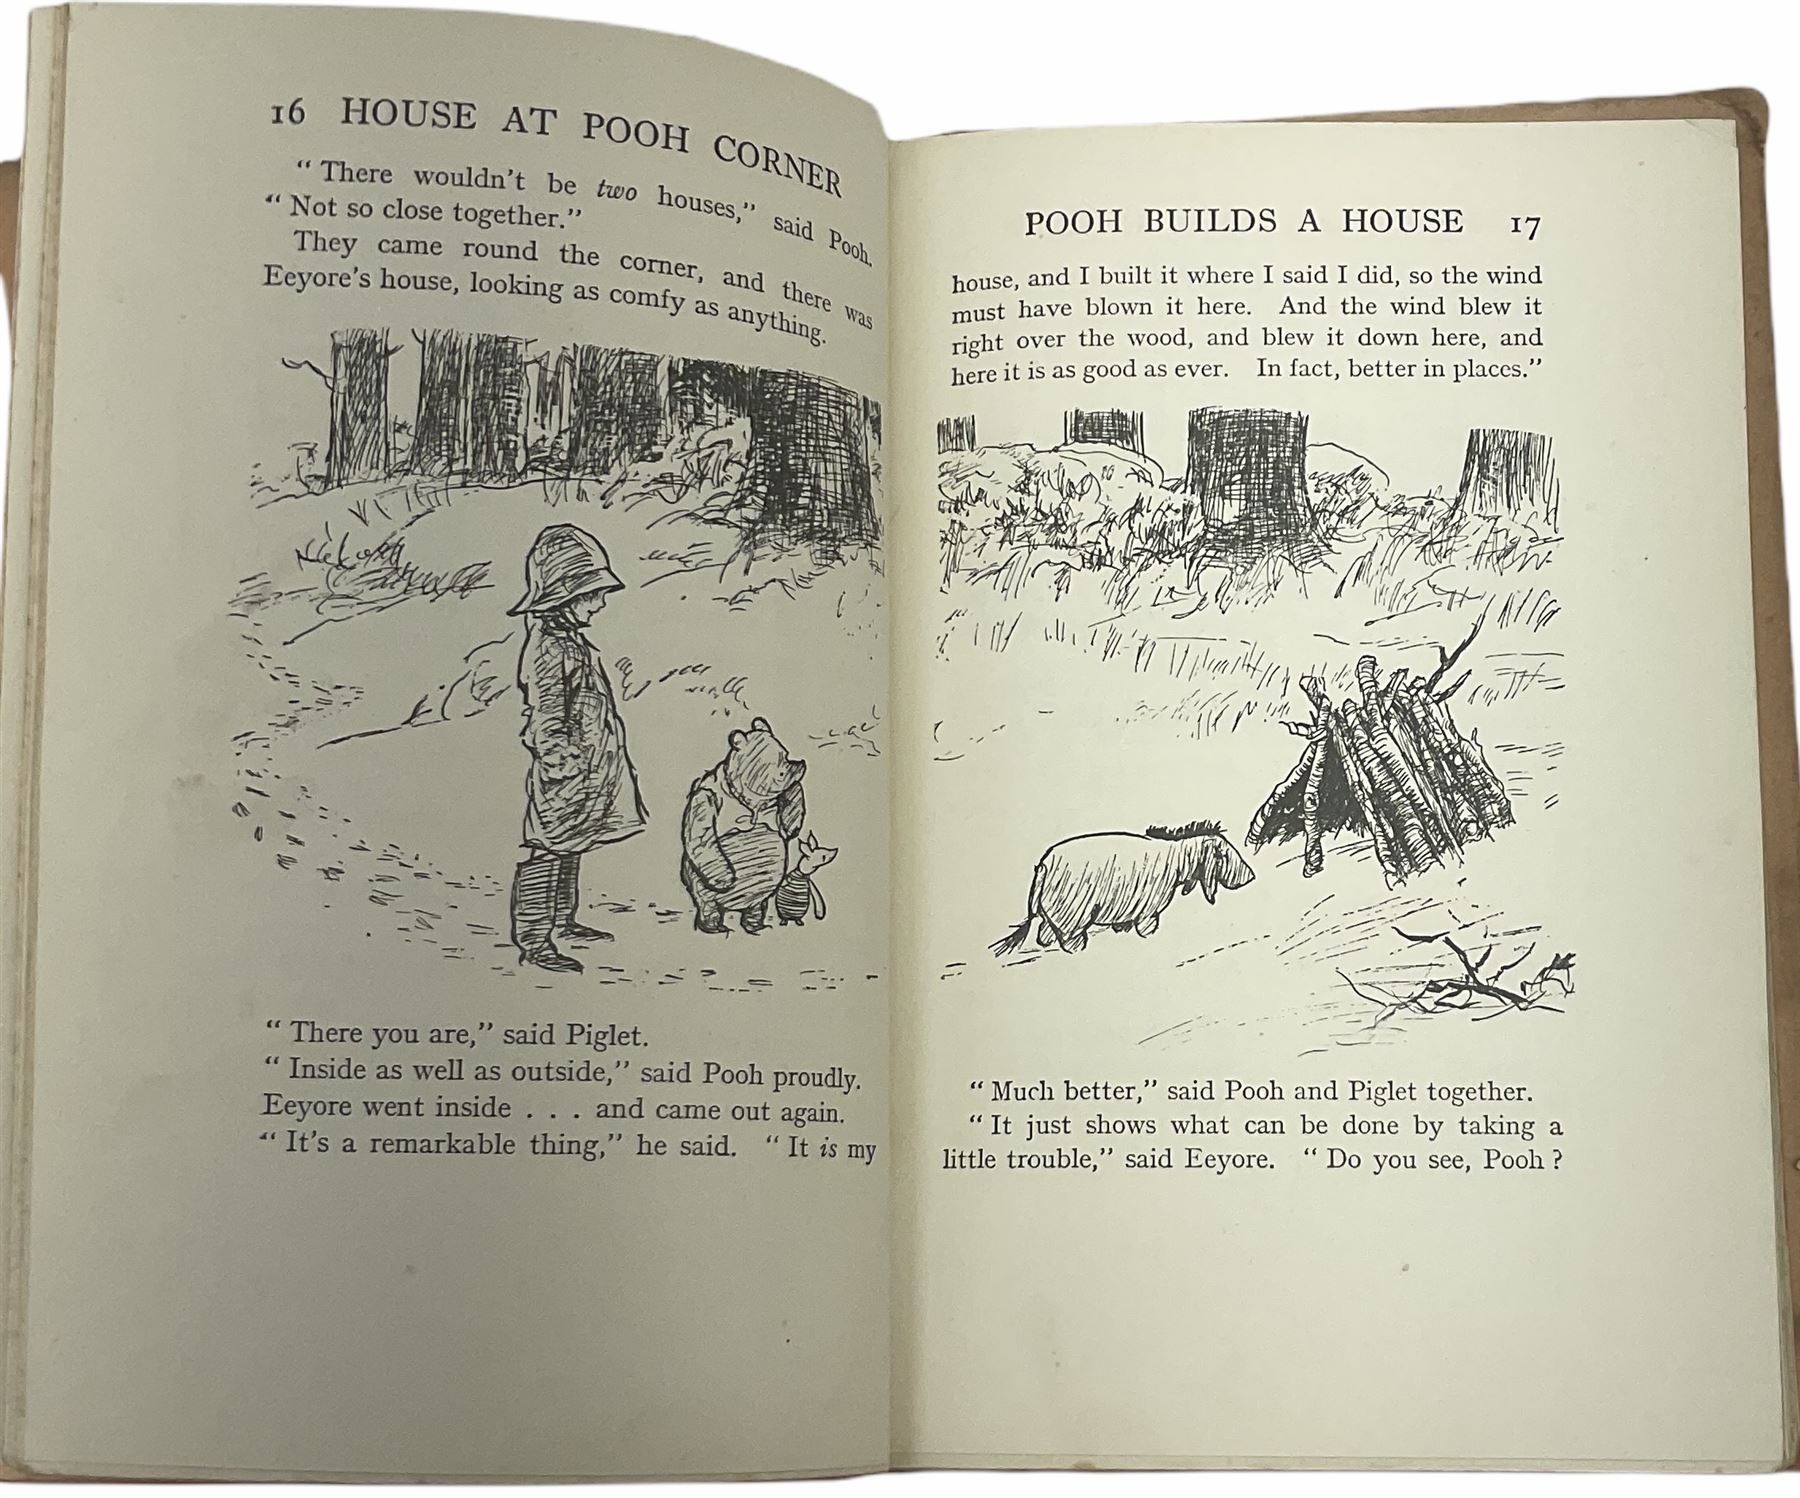 Five A.A. Milne Winnie The Pooh books illustrated by E.H. Shepard - The House at Pooh Corner. 1928. - Image 4 of 13